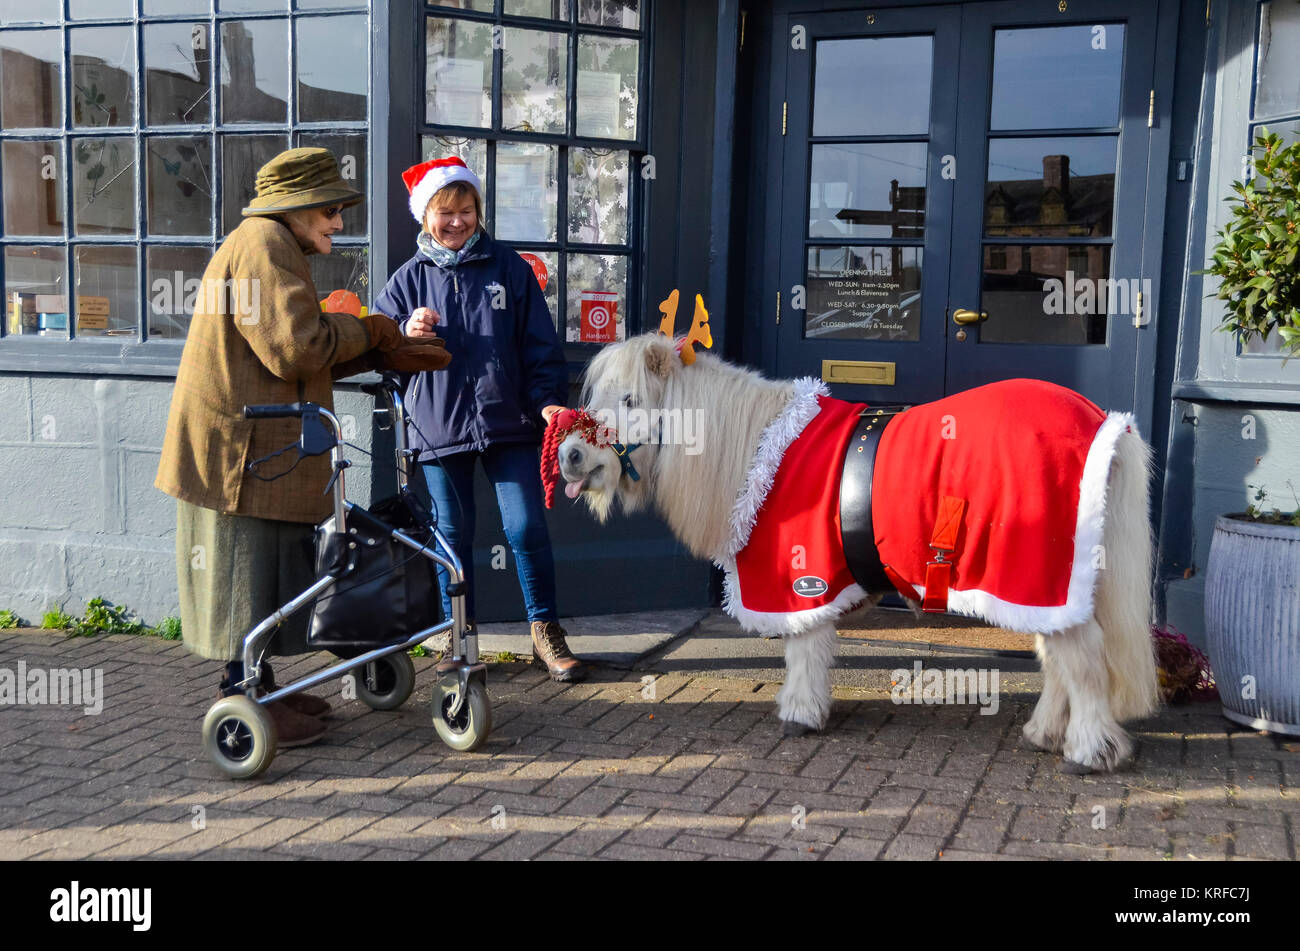 Beaminster, Dorset, UK.  19th December 2017.   A Ferne Animal Sanctuary Shetland pony at Beaminster in Dorset adorned in a festive Christmas costume to meet members of the public in an effort to raise funds for the sanctuary based in Chard, has a comical moment when it sticks its tongue out at a pensioner.  Picture Credit: Graham Hunt/Alamy Live News Stock Photo